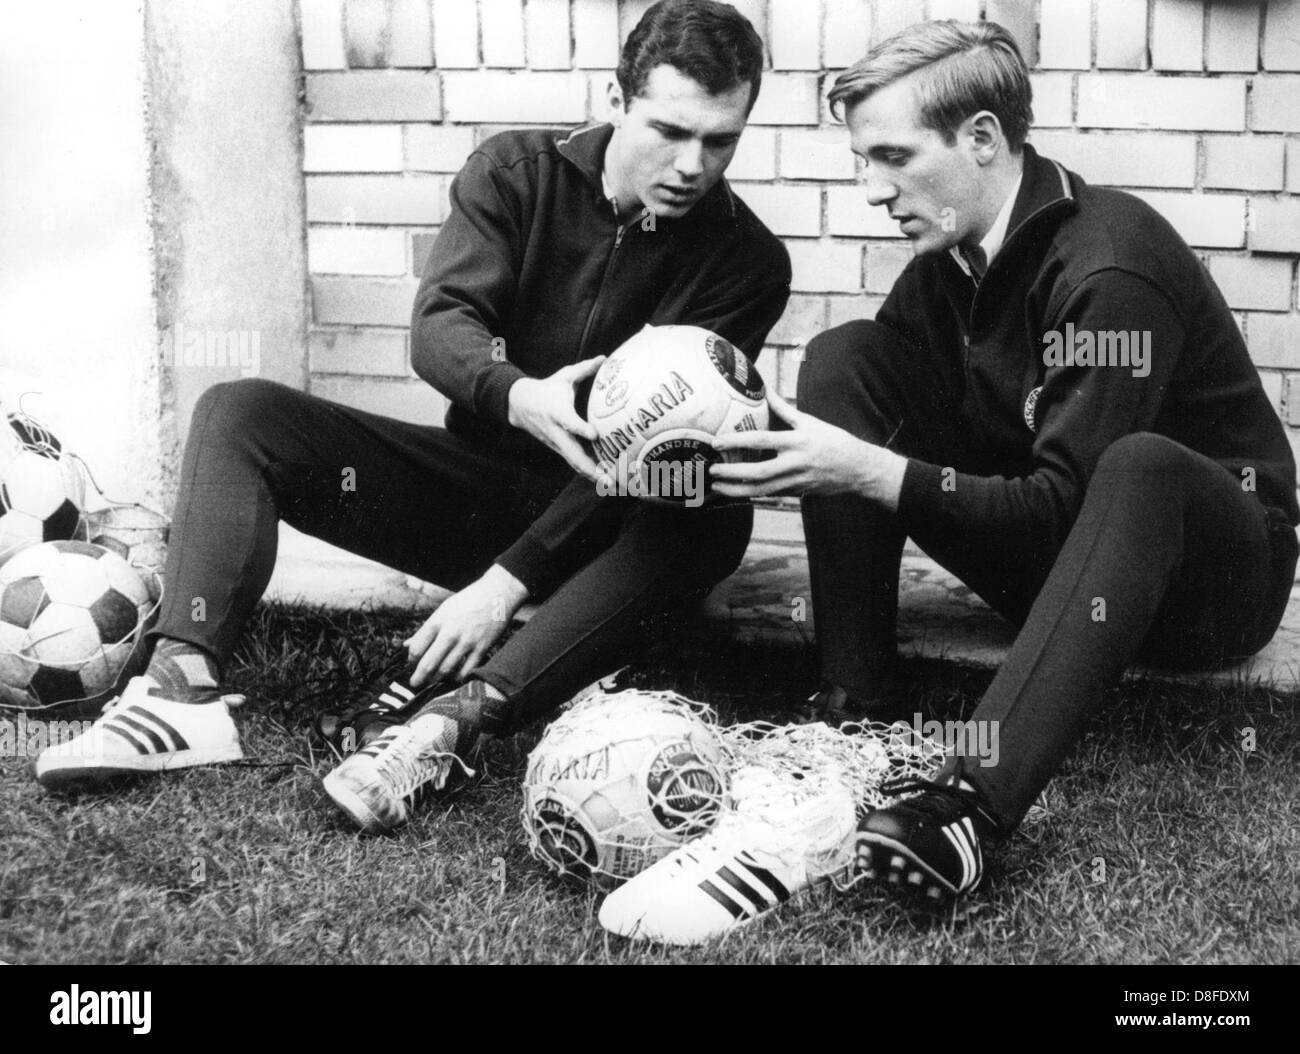 German national players Franz Beckenbauer (l) and Günter Netzer (r) have a look at new soccer balls during a training camp on the 9th of November in 1965. Stock Photo